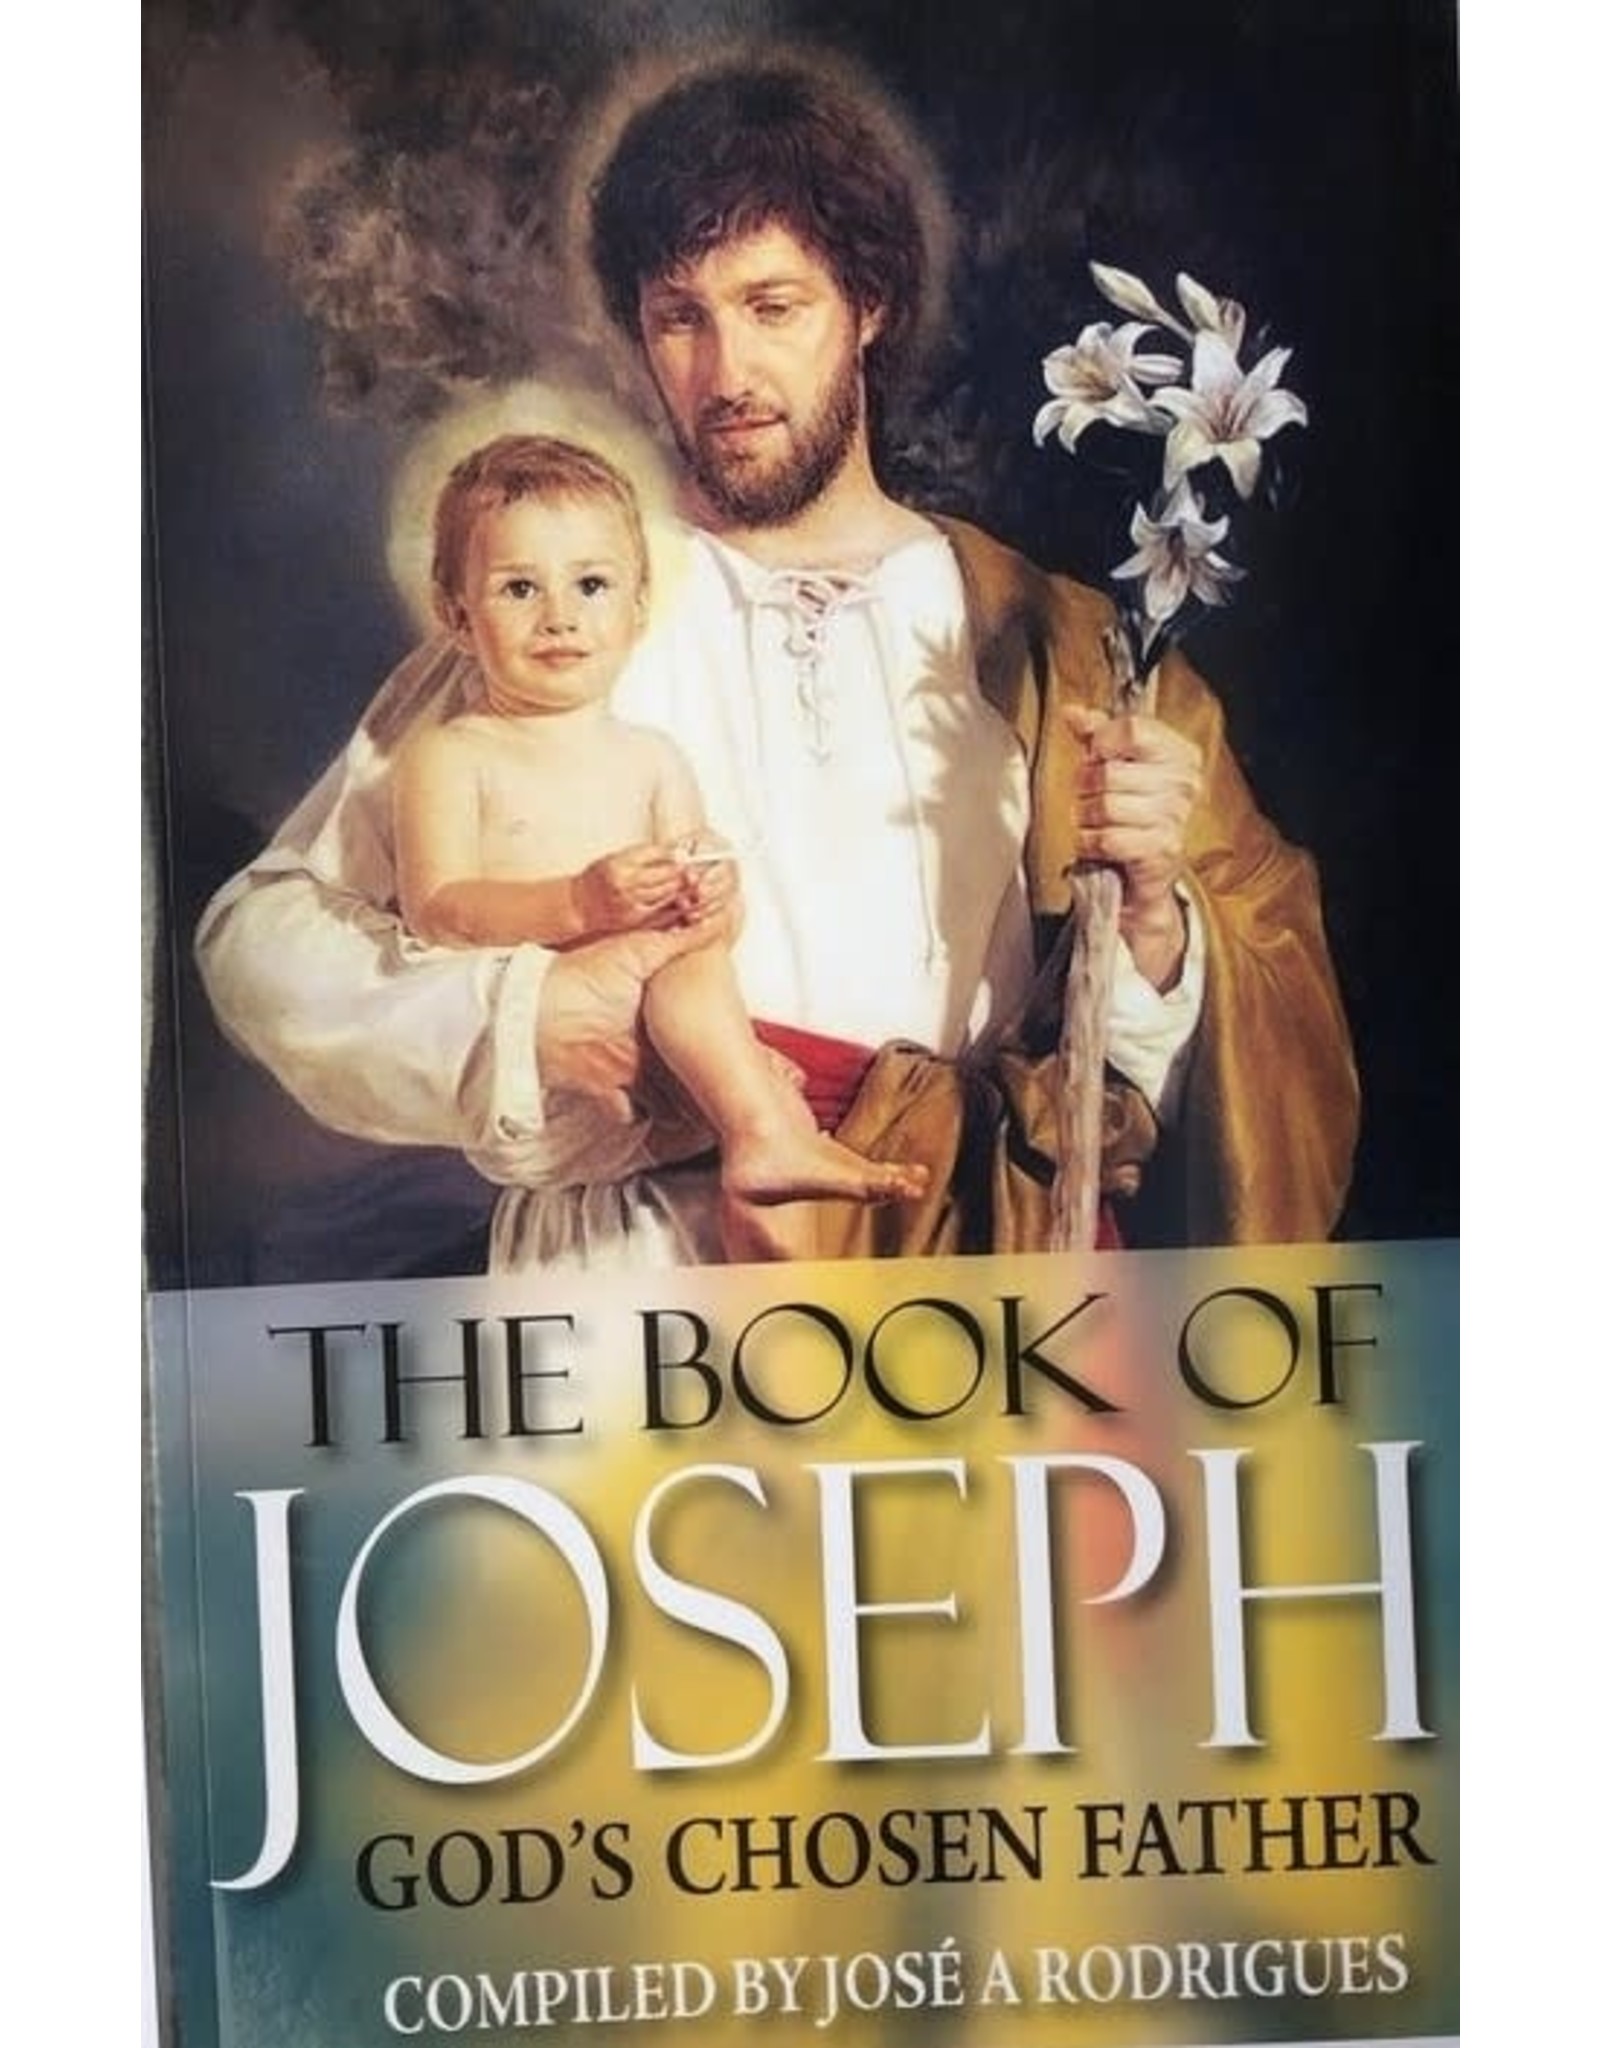 The Book of Joseph  God's Chosen Father- By Jose A Rodrigues